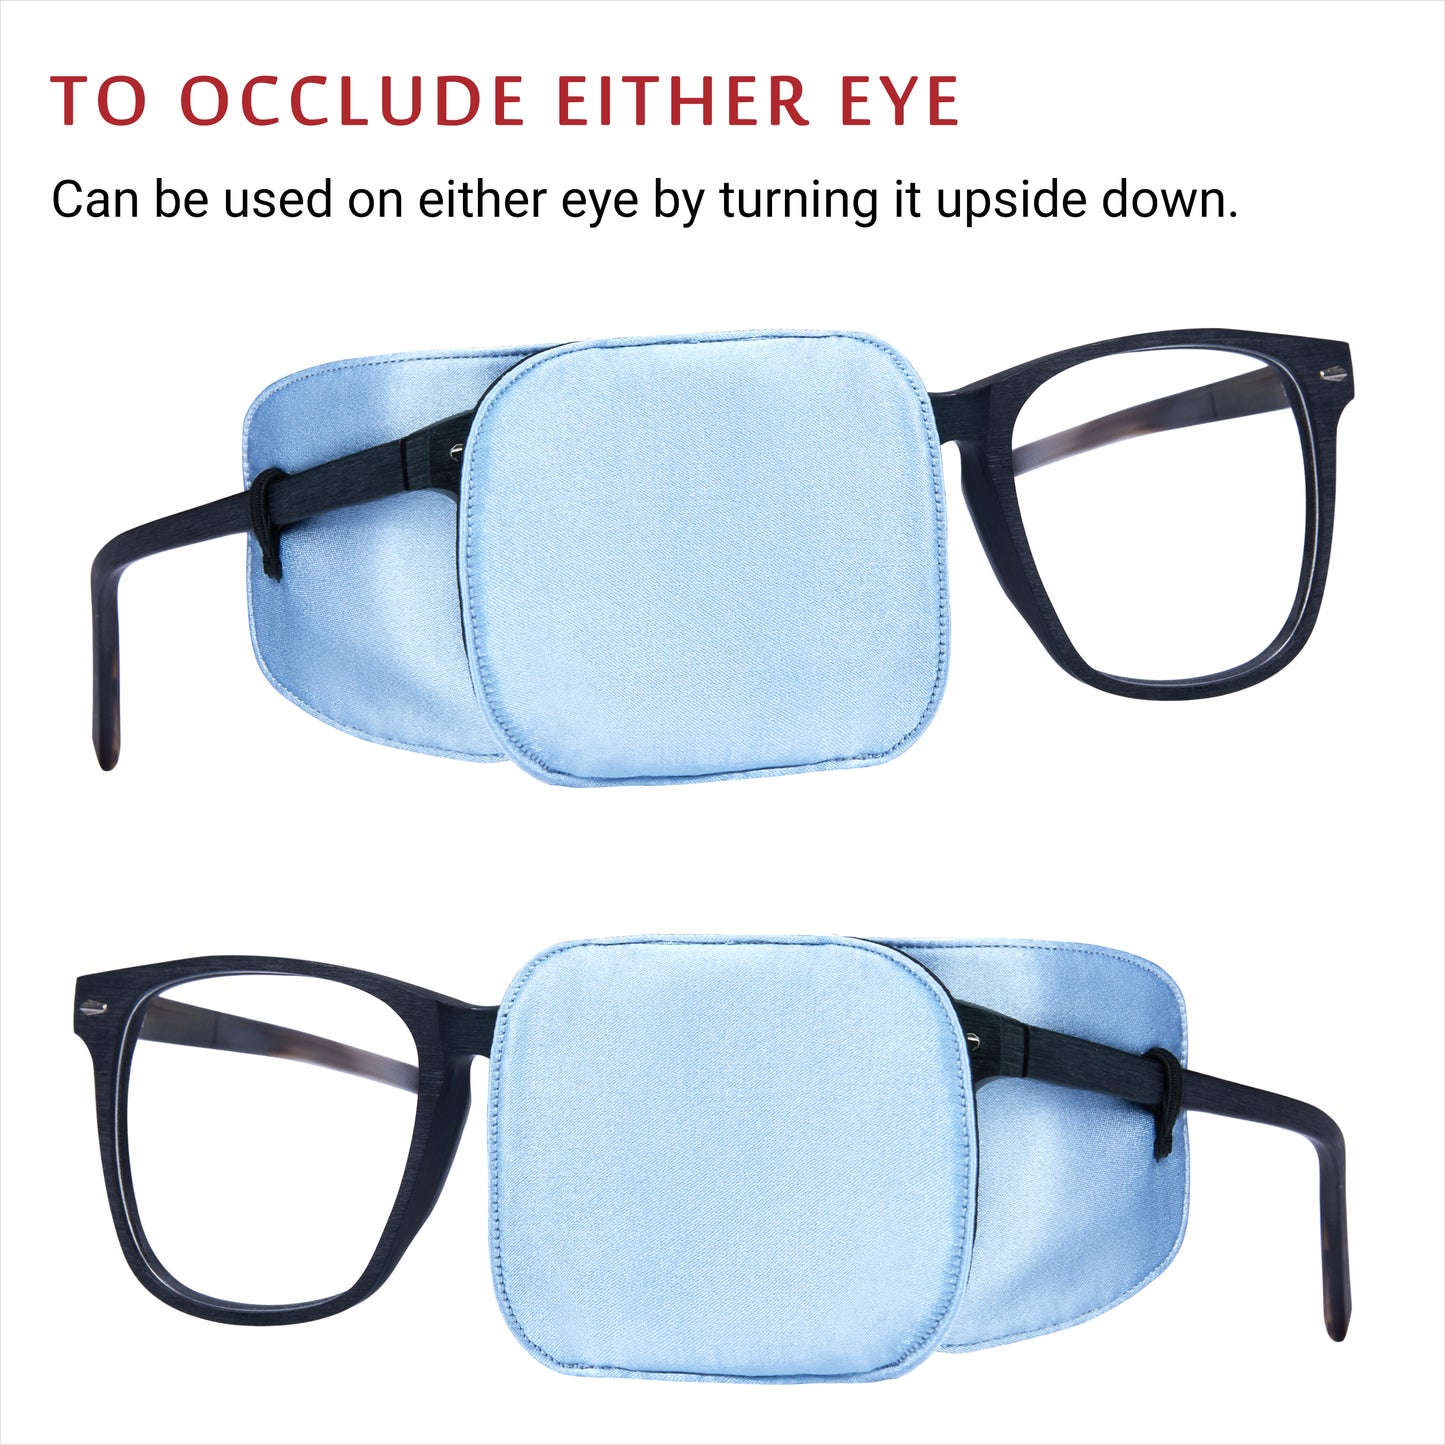 Astropic 2Pcs Silk Eye Patches for Glasses (Large, Sky Blue)